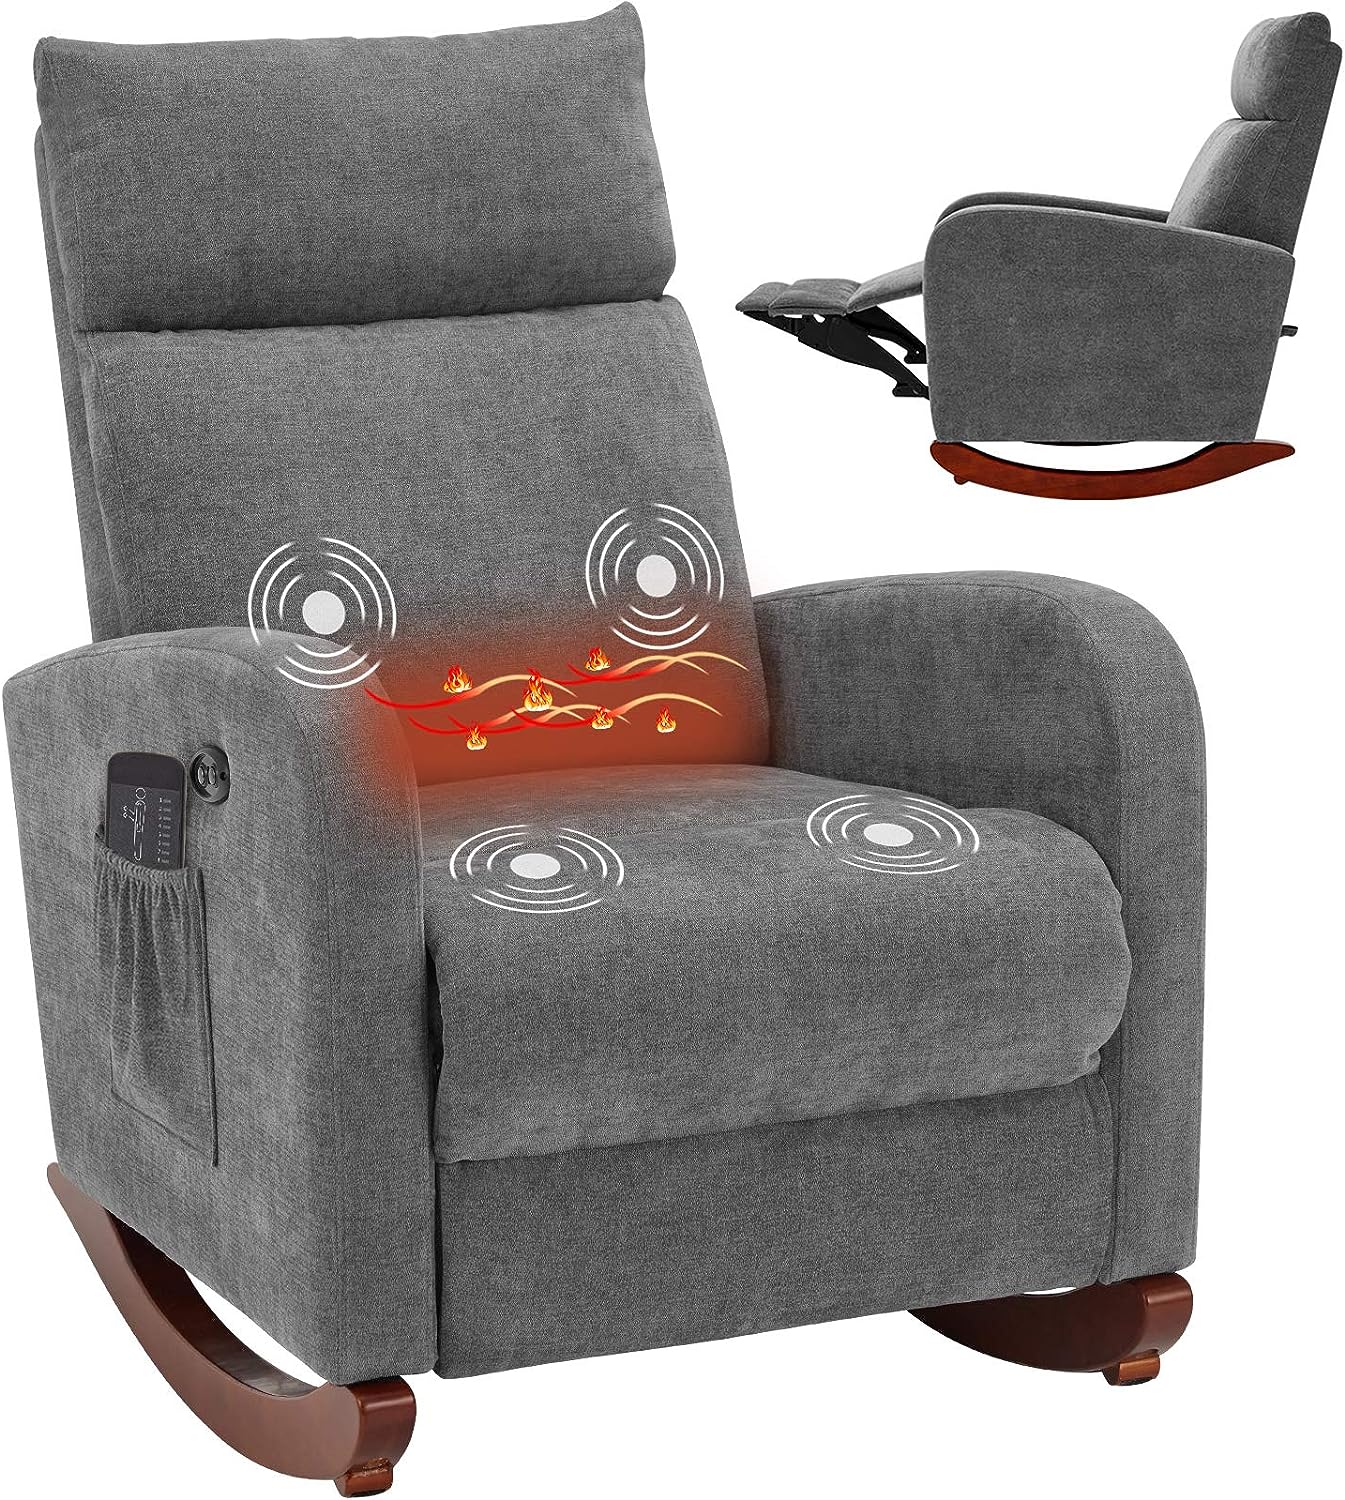 AVAWING Electric Massage Rocking Chair, Recliner Chair [...]